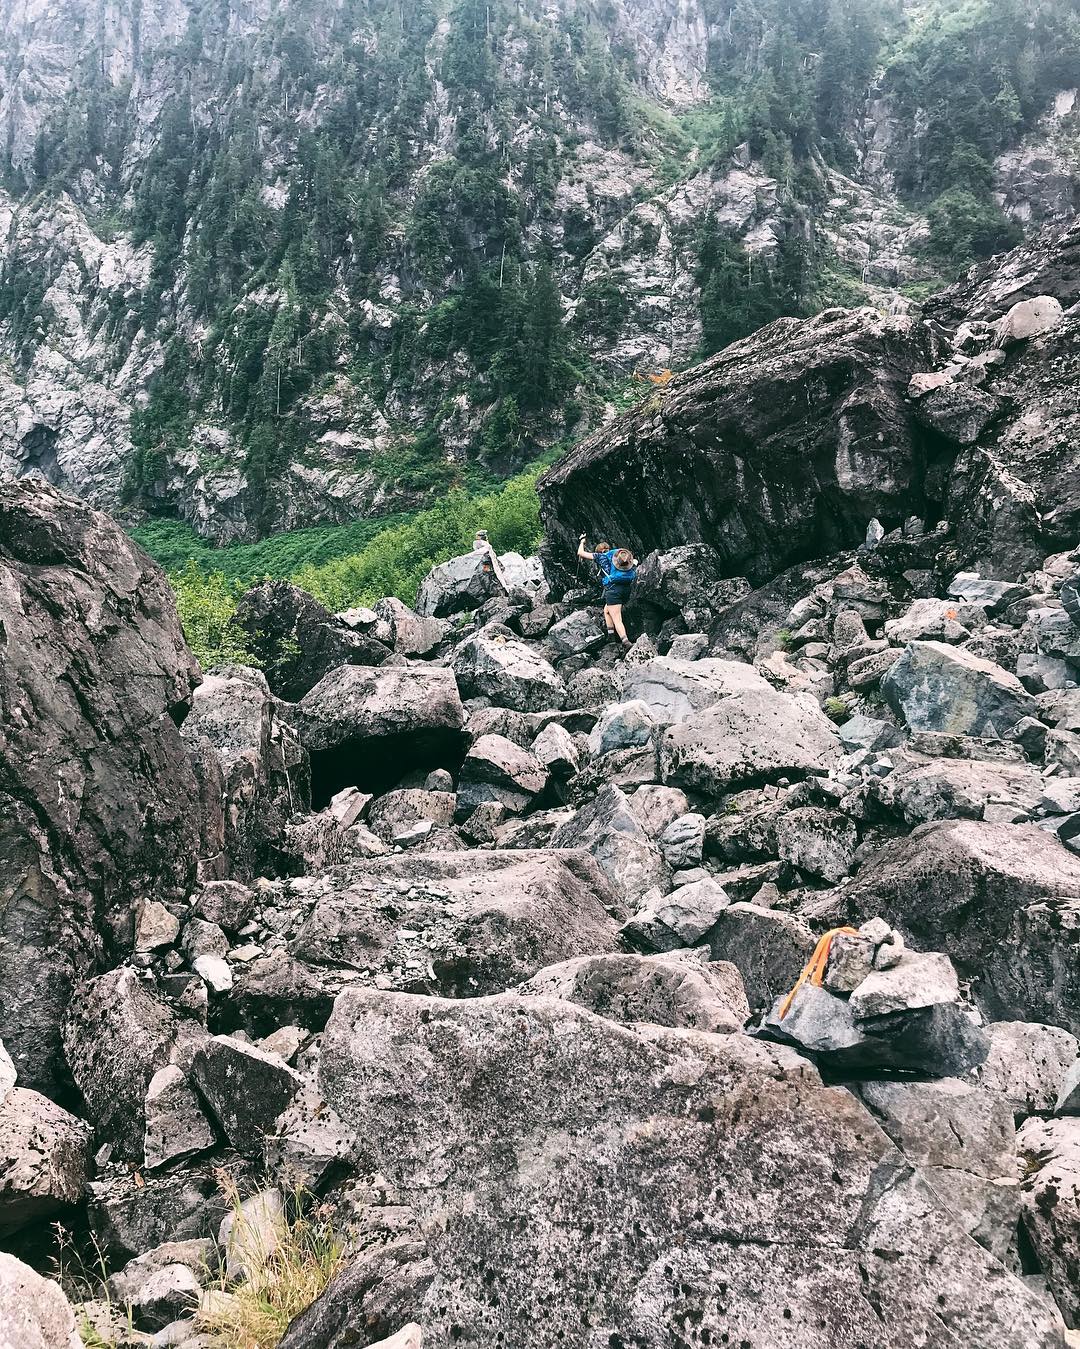 A small patch of the boulder field we hiked through on Saturday. @andreasupernova for scale....